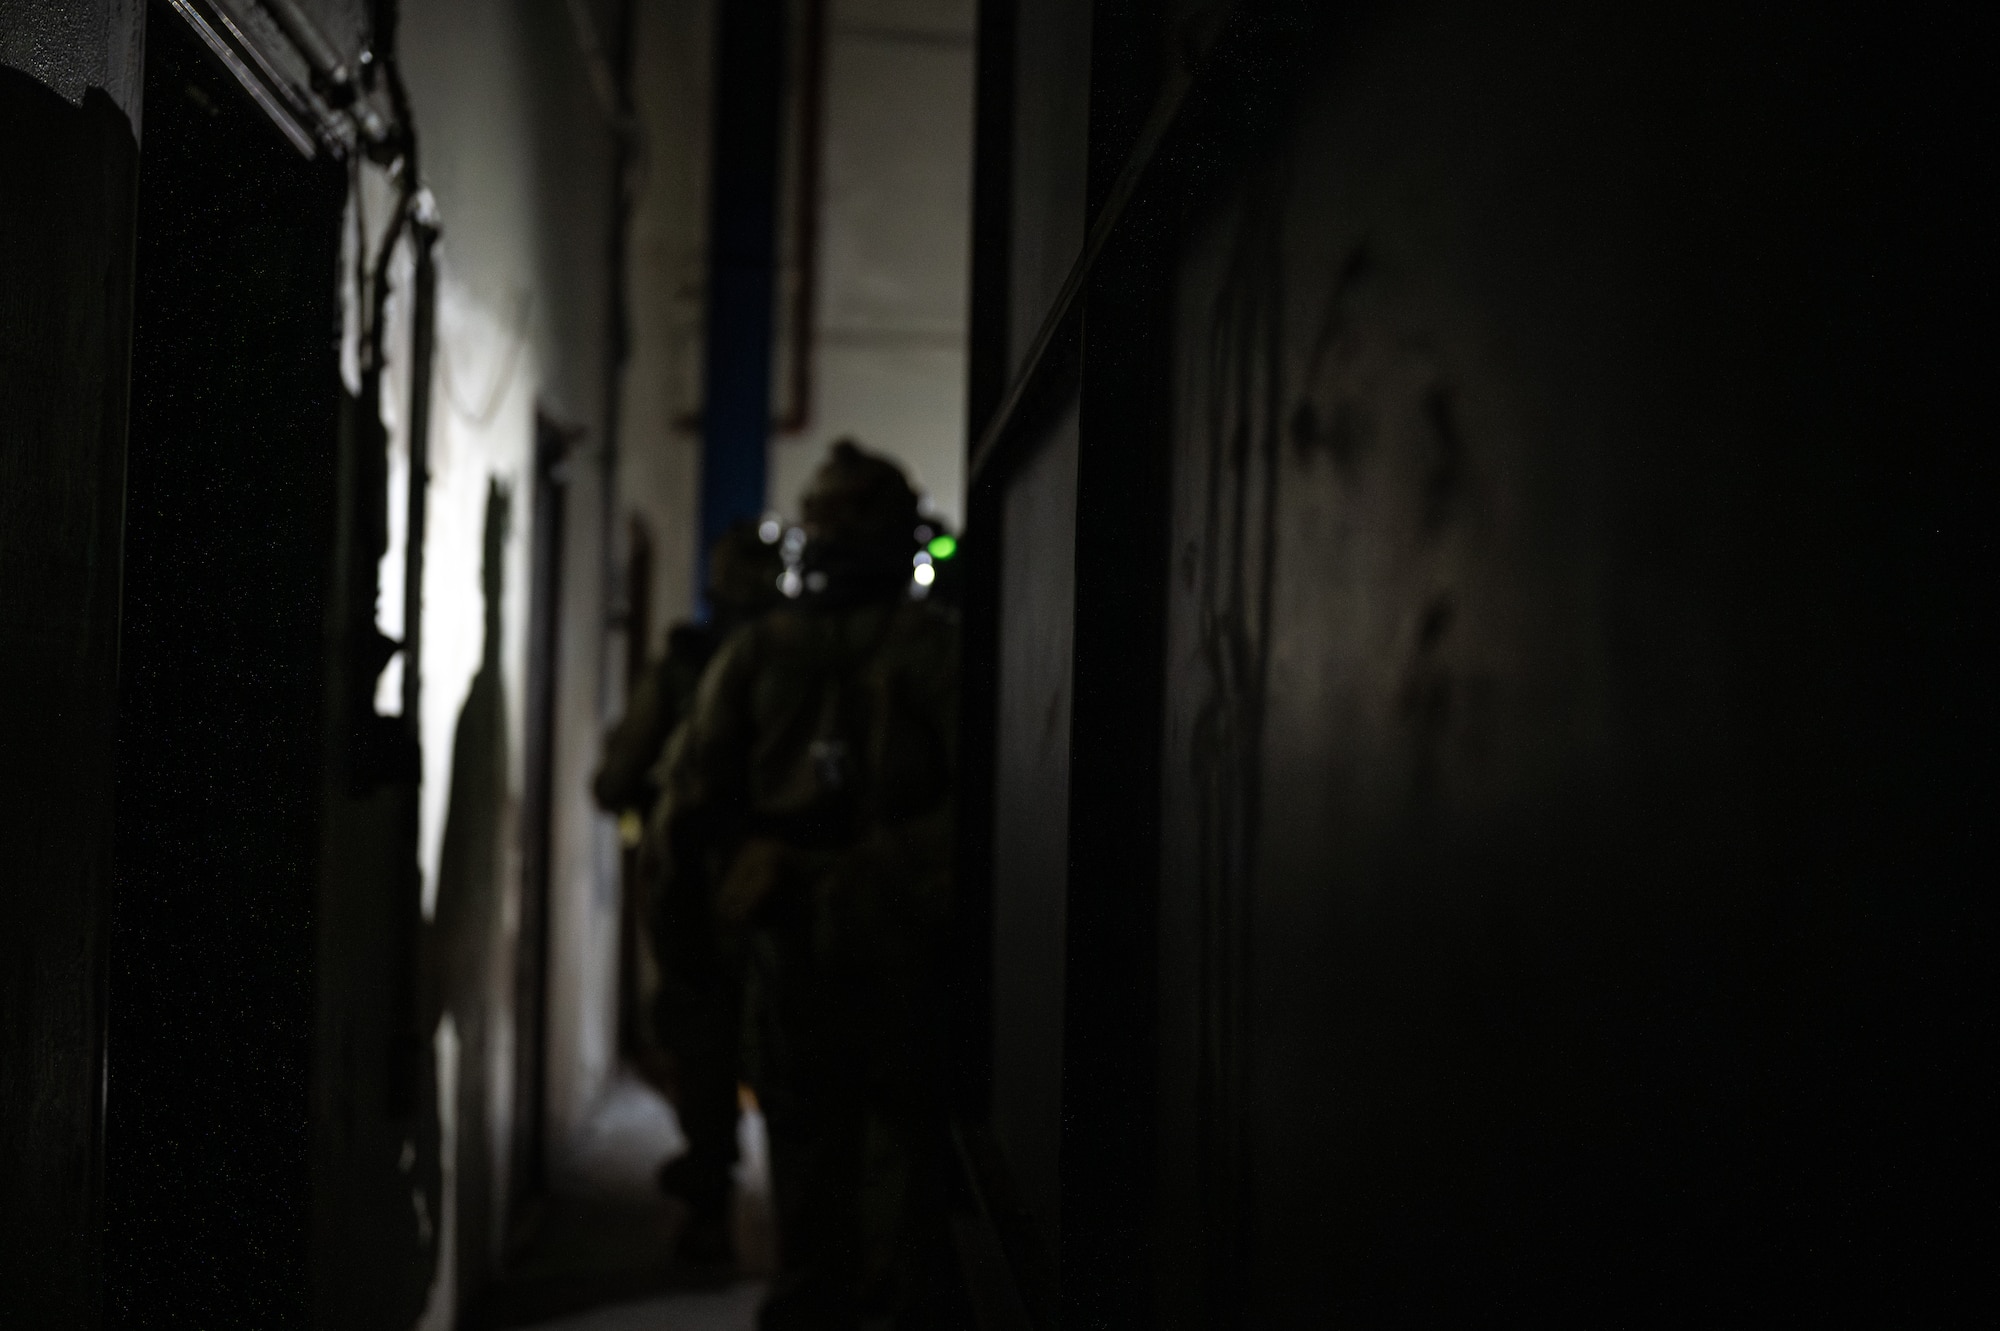 A U.S. Air Force Airman with the 353rd Special Operations Wing stands inside an abandoned factory during a simulated chemical, biological, radiological, nuclear, and explosives mass casualty scenario at Kadena Air Base, Japan, Aug. 17, 2023. The operators were evaluated on their rapid action, decision making, and technical performance of medical interventions during the CBRNE scenario-based training. (U.S. Air Force photo by Staff Sgt. Jessi Roth)